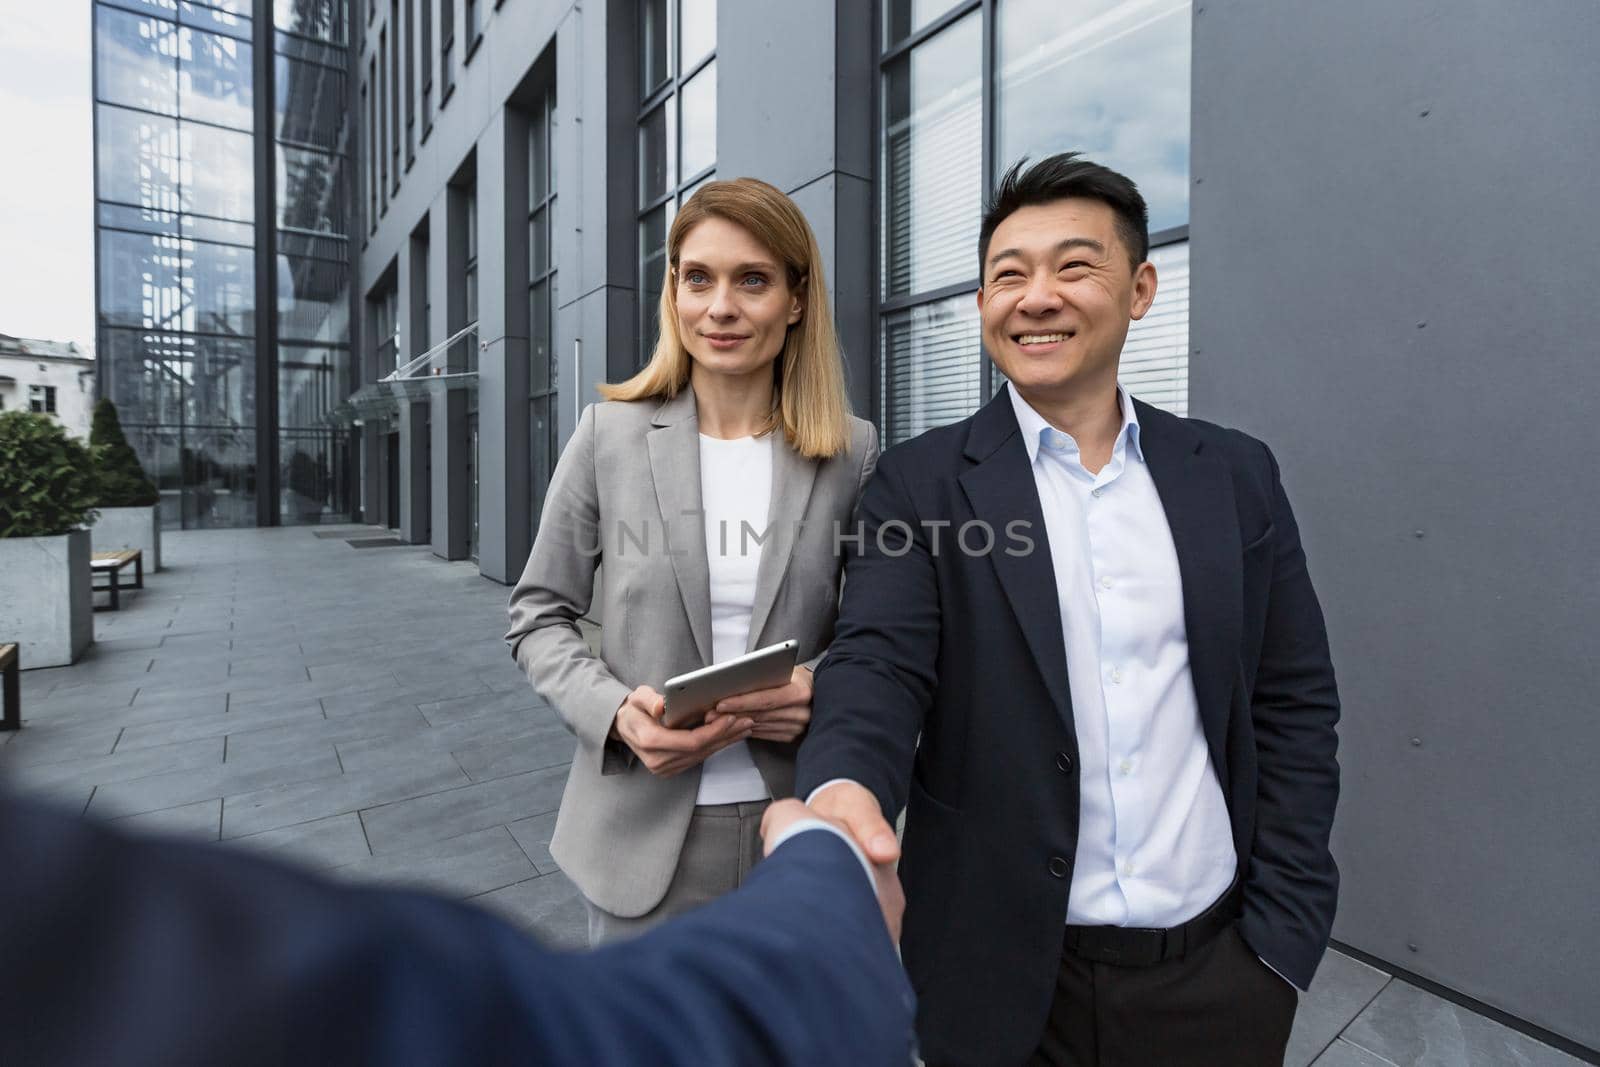 Business meet, three business colleagues greet each other, men shake hands, employees outside the office building in business clothes